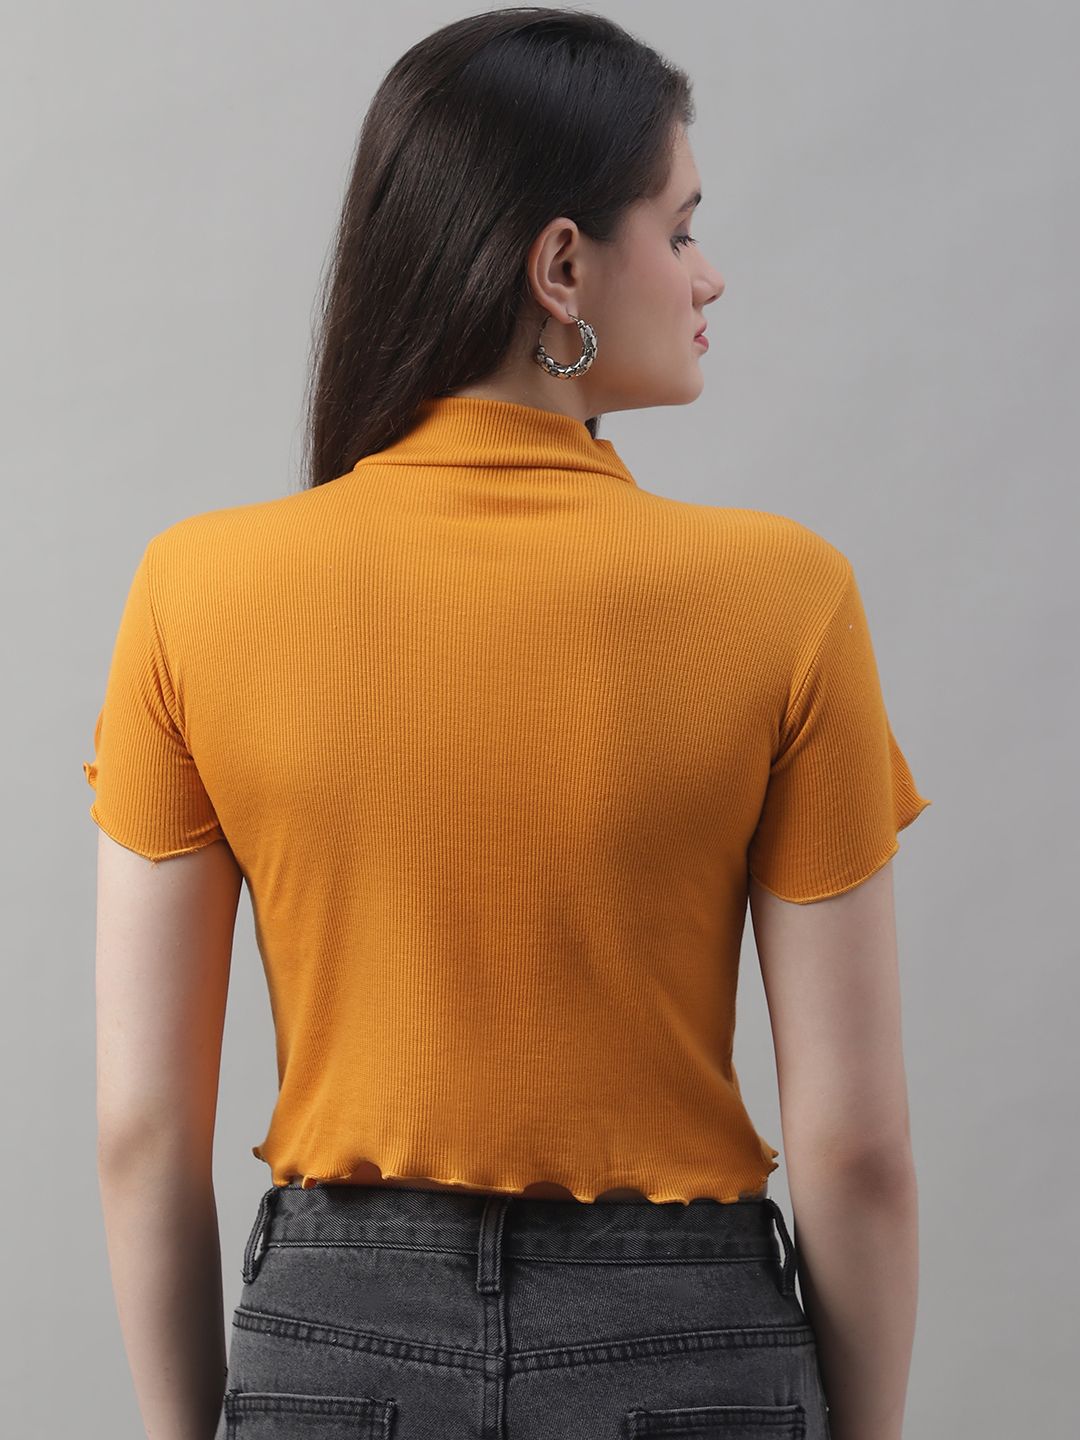 Mustard Turtle-Neck Crop Top with Lettuce Edge